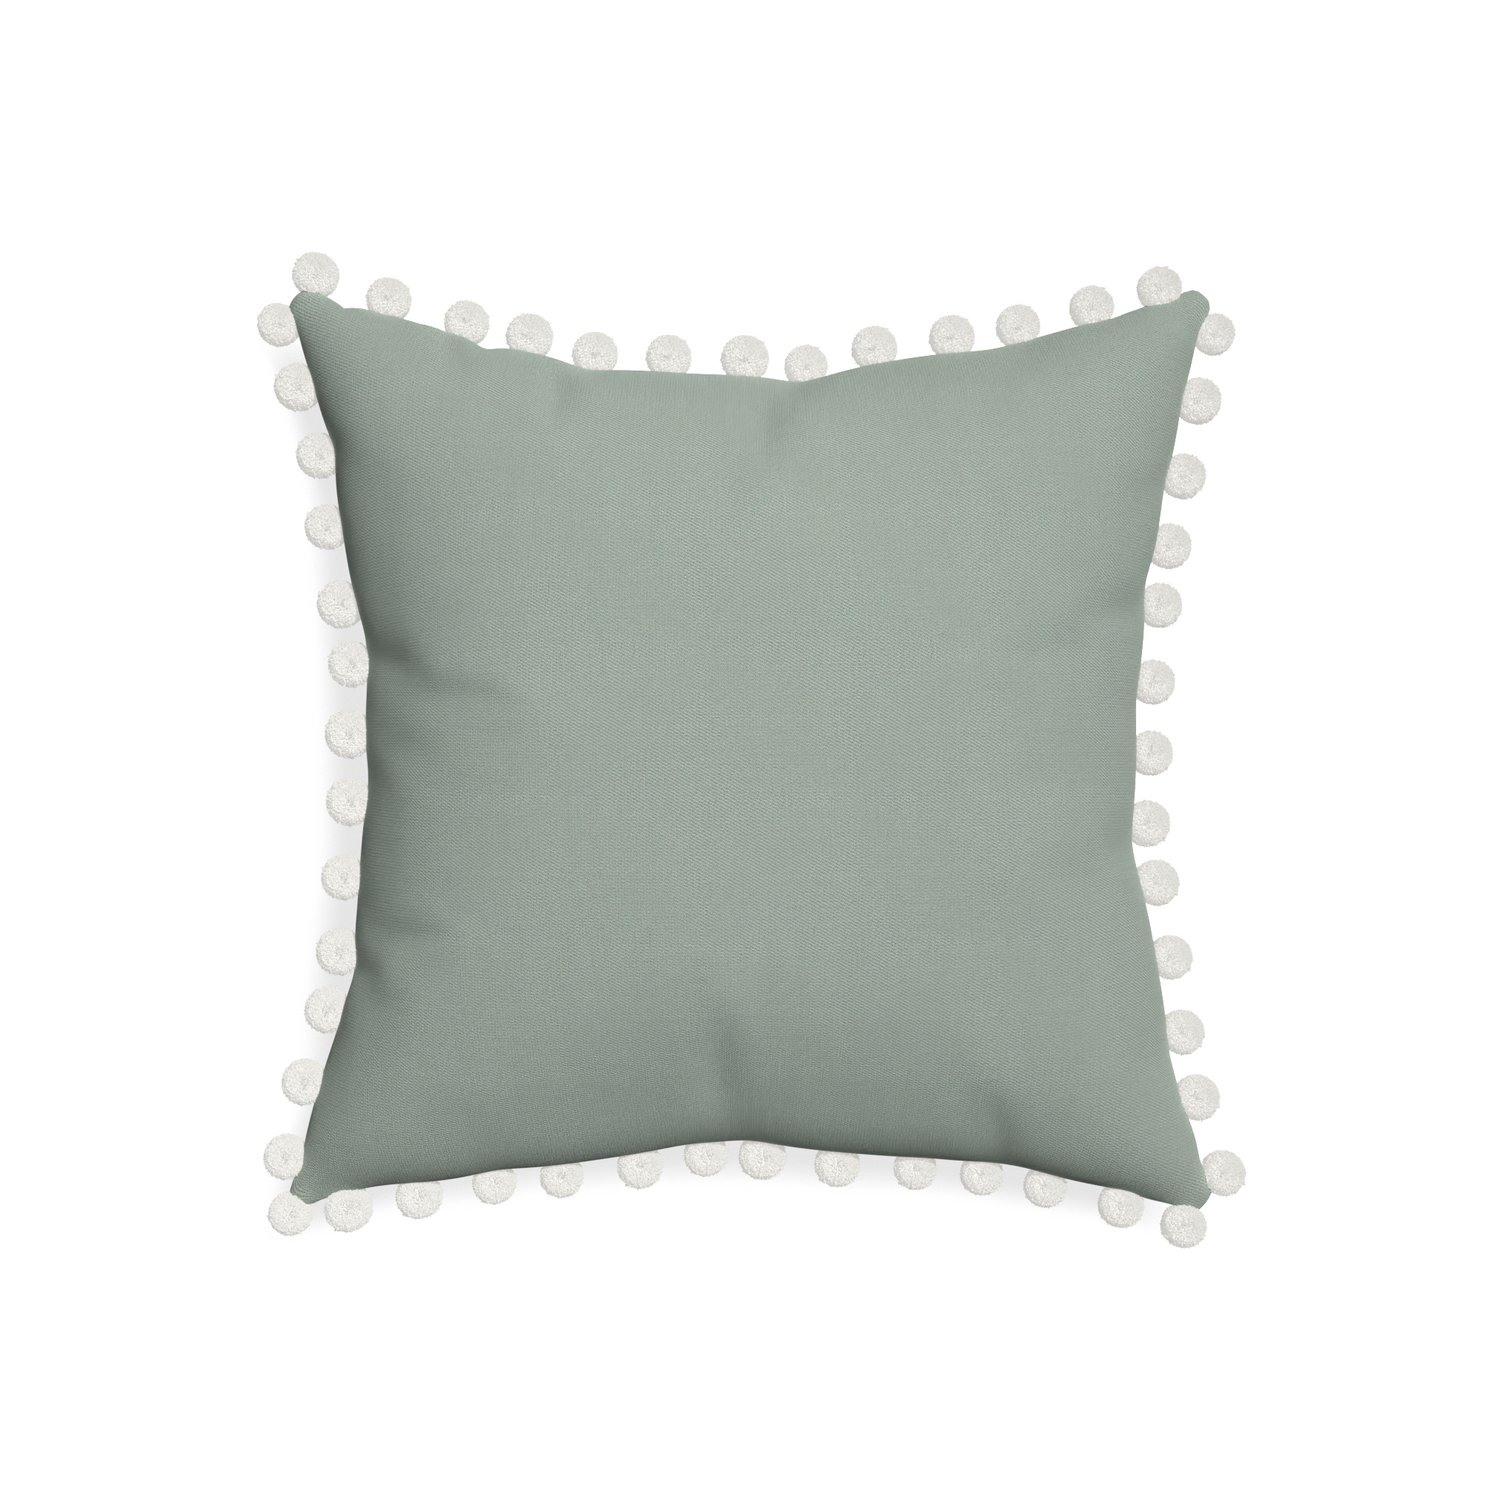 20-square sage custom sage green cottonpillow with snow pom pom on white background